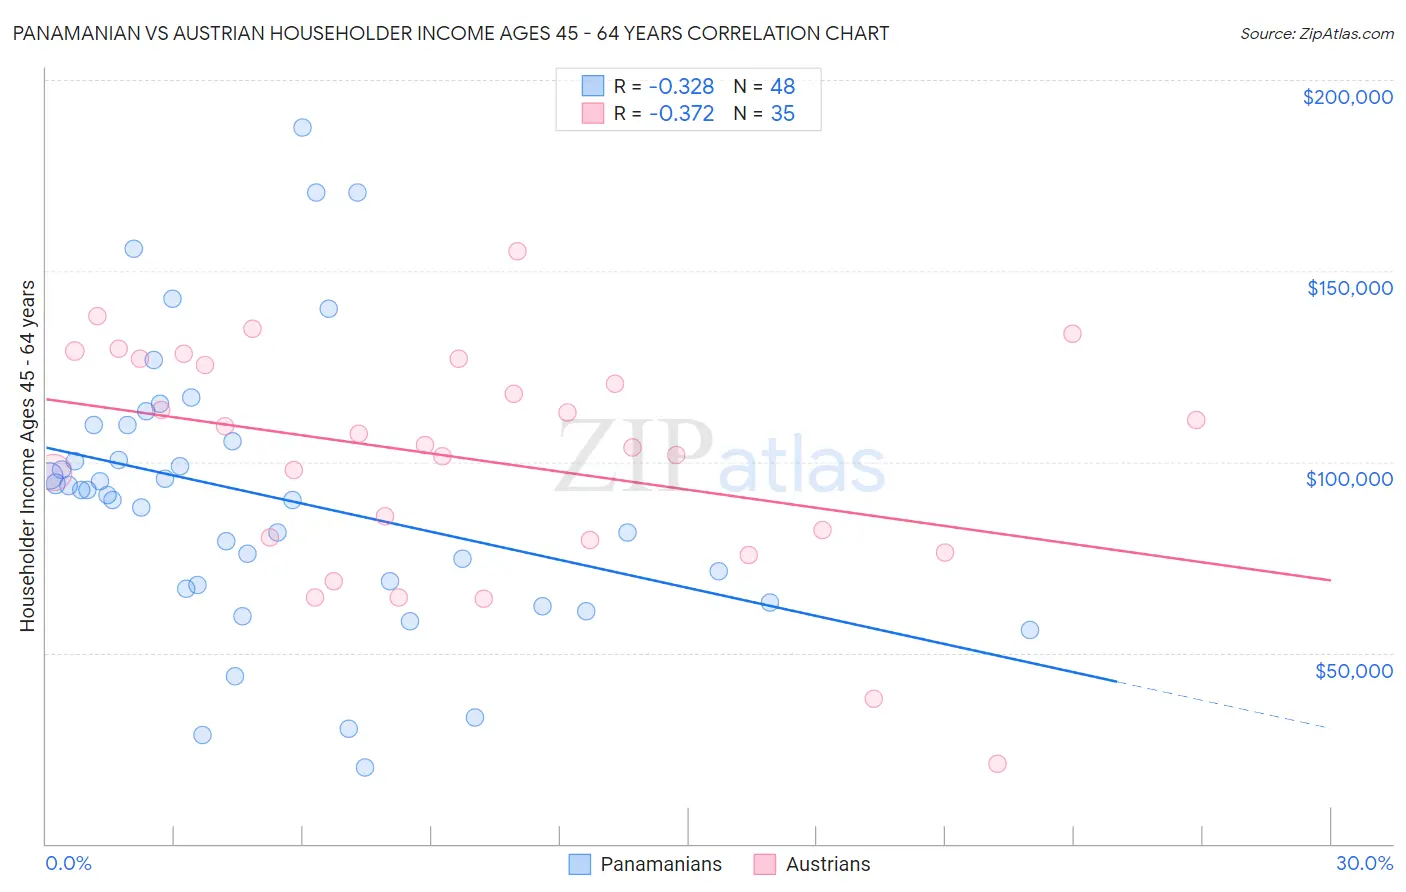 Panamanian vs Austrian Householder Income Ages 45 - 64 years